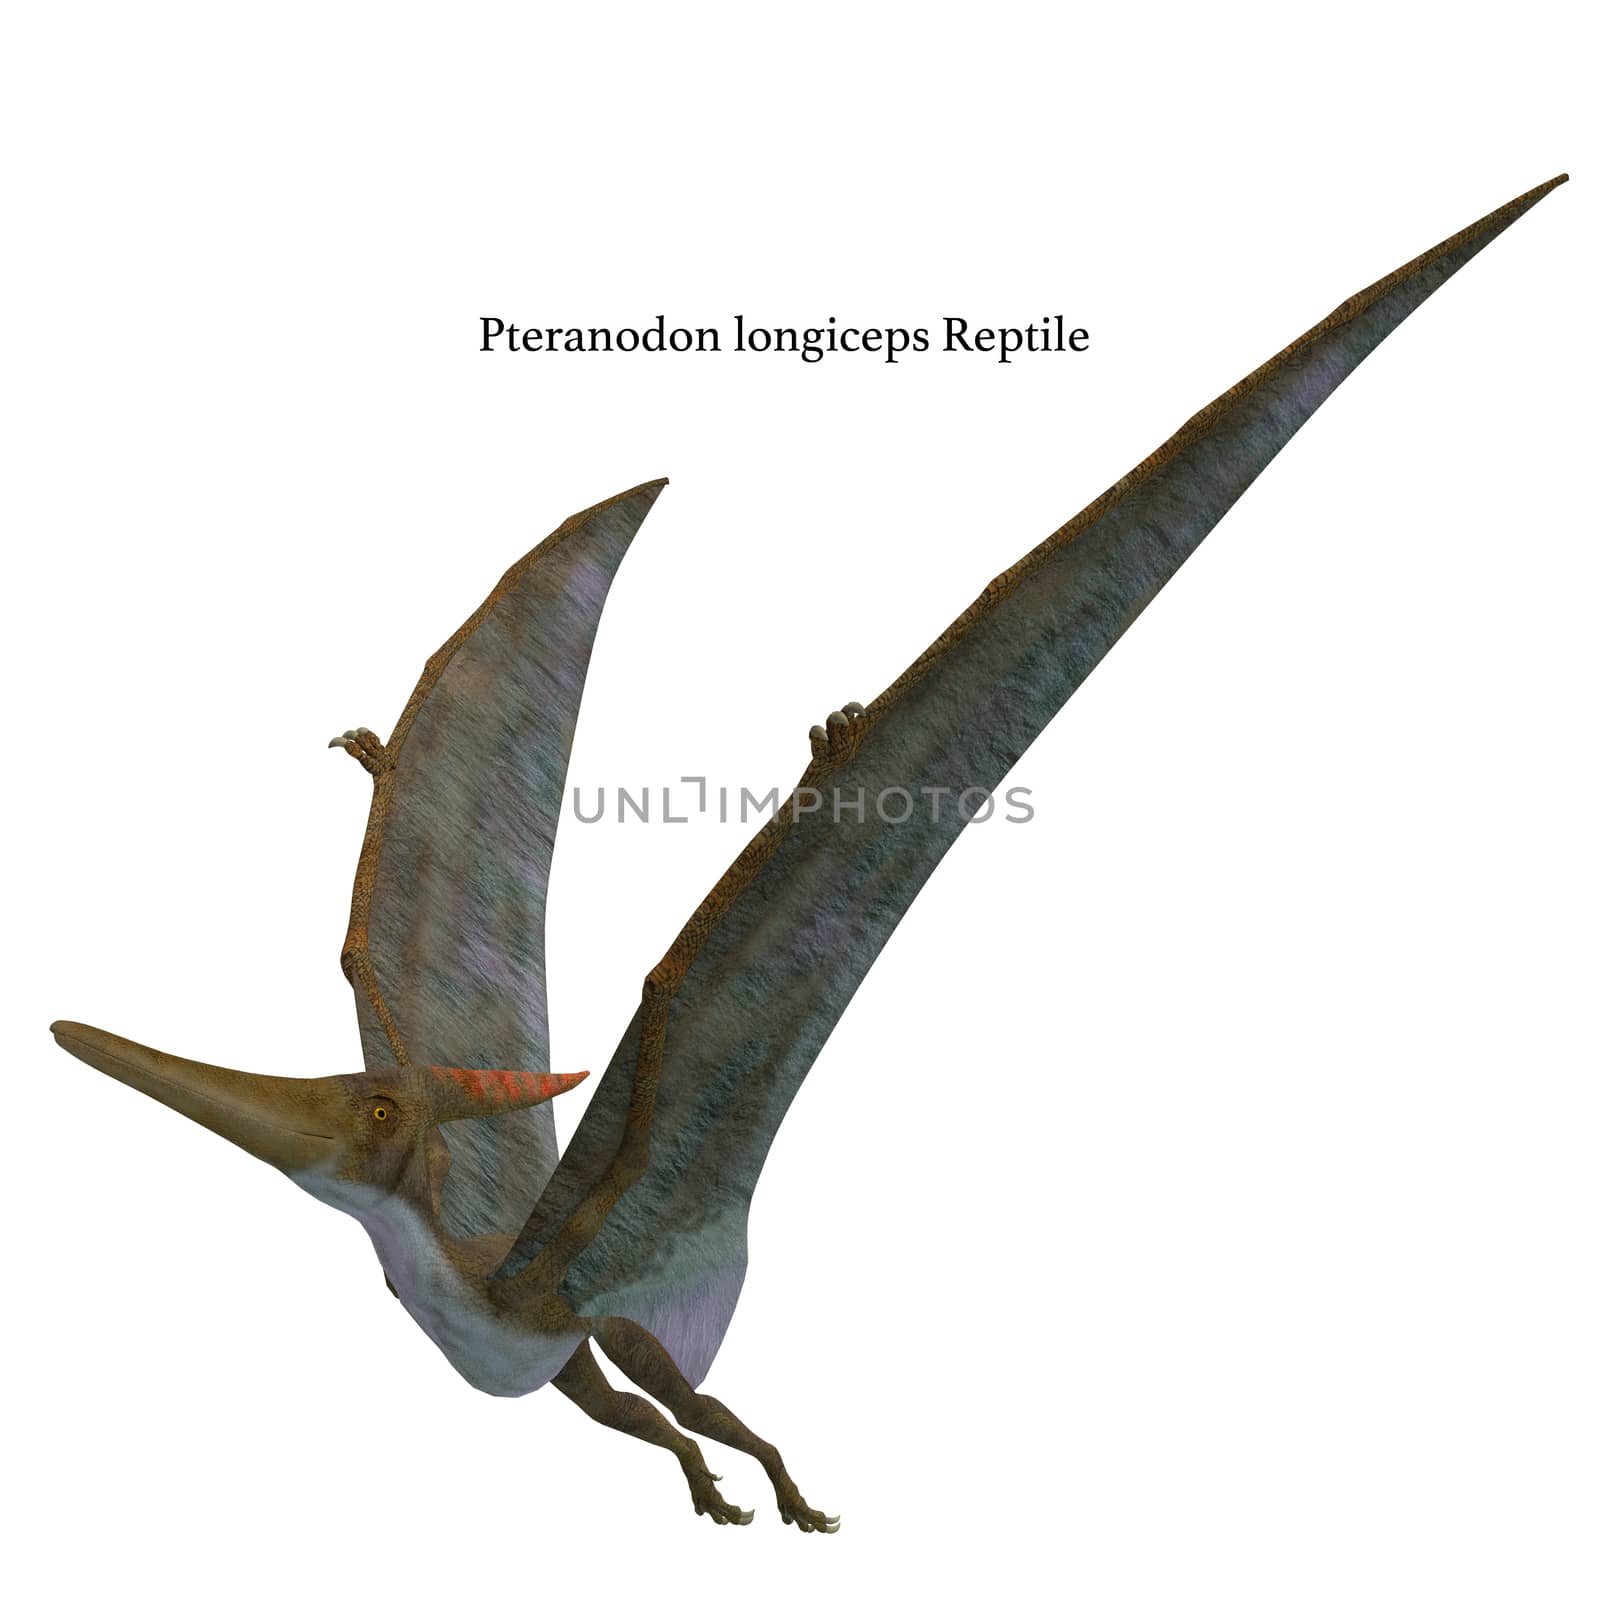 Pteranodon Reptile Wings Up by Catmando